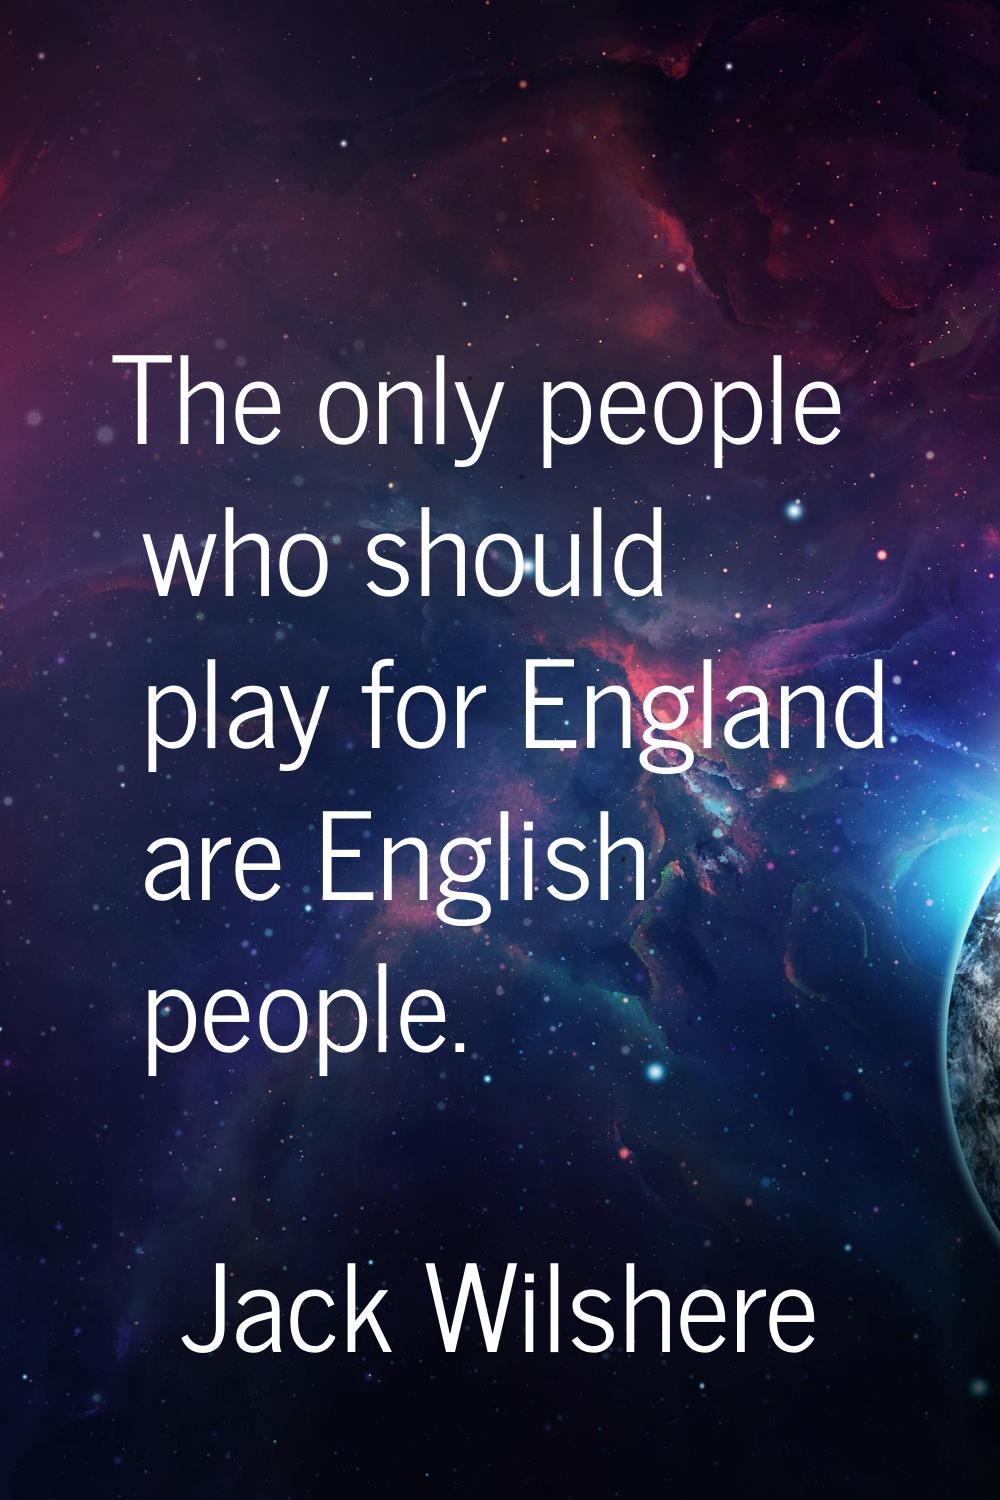 The only people who should play for England are English people.